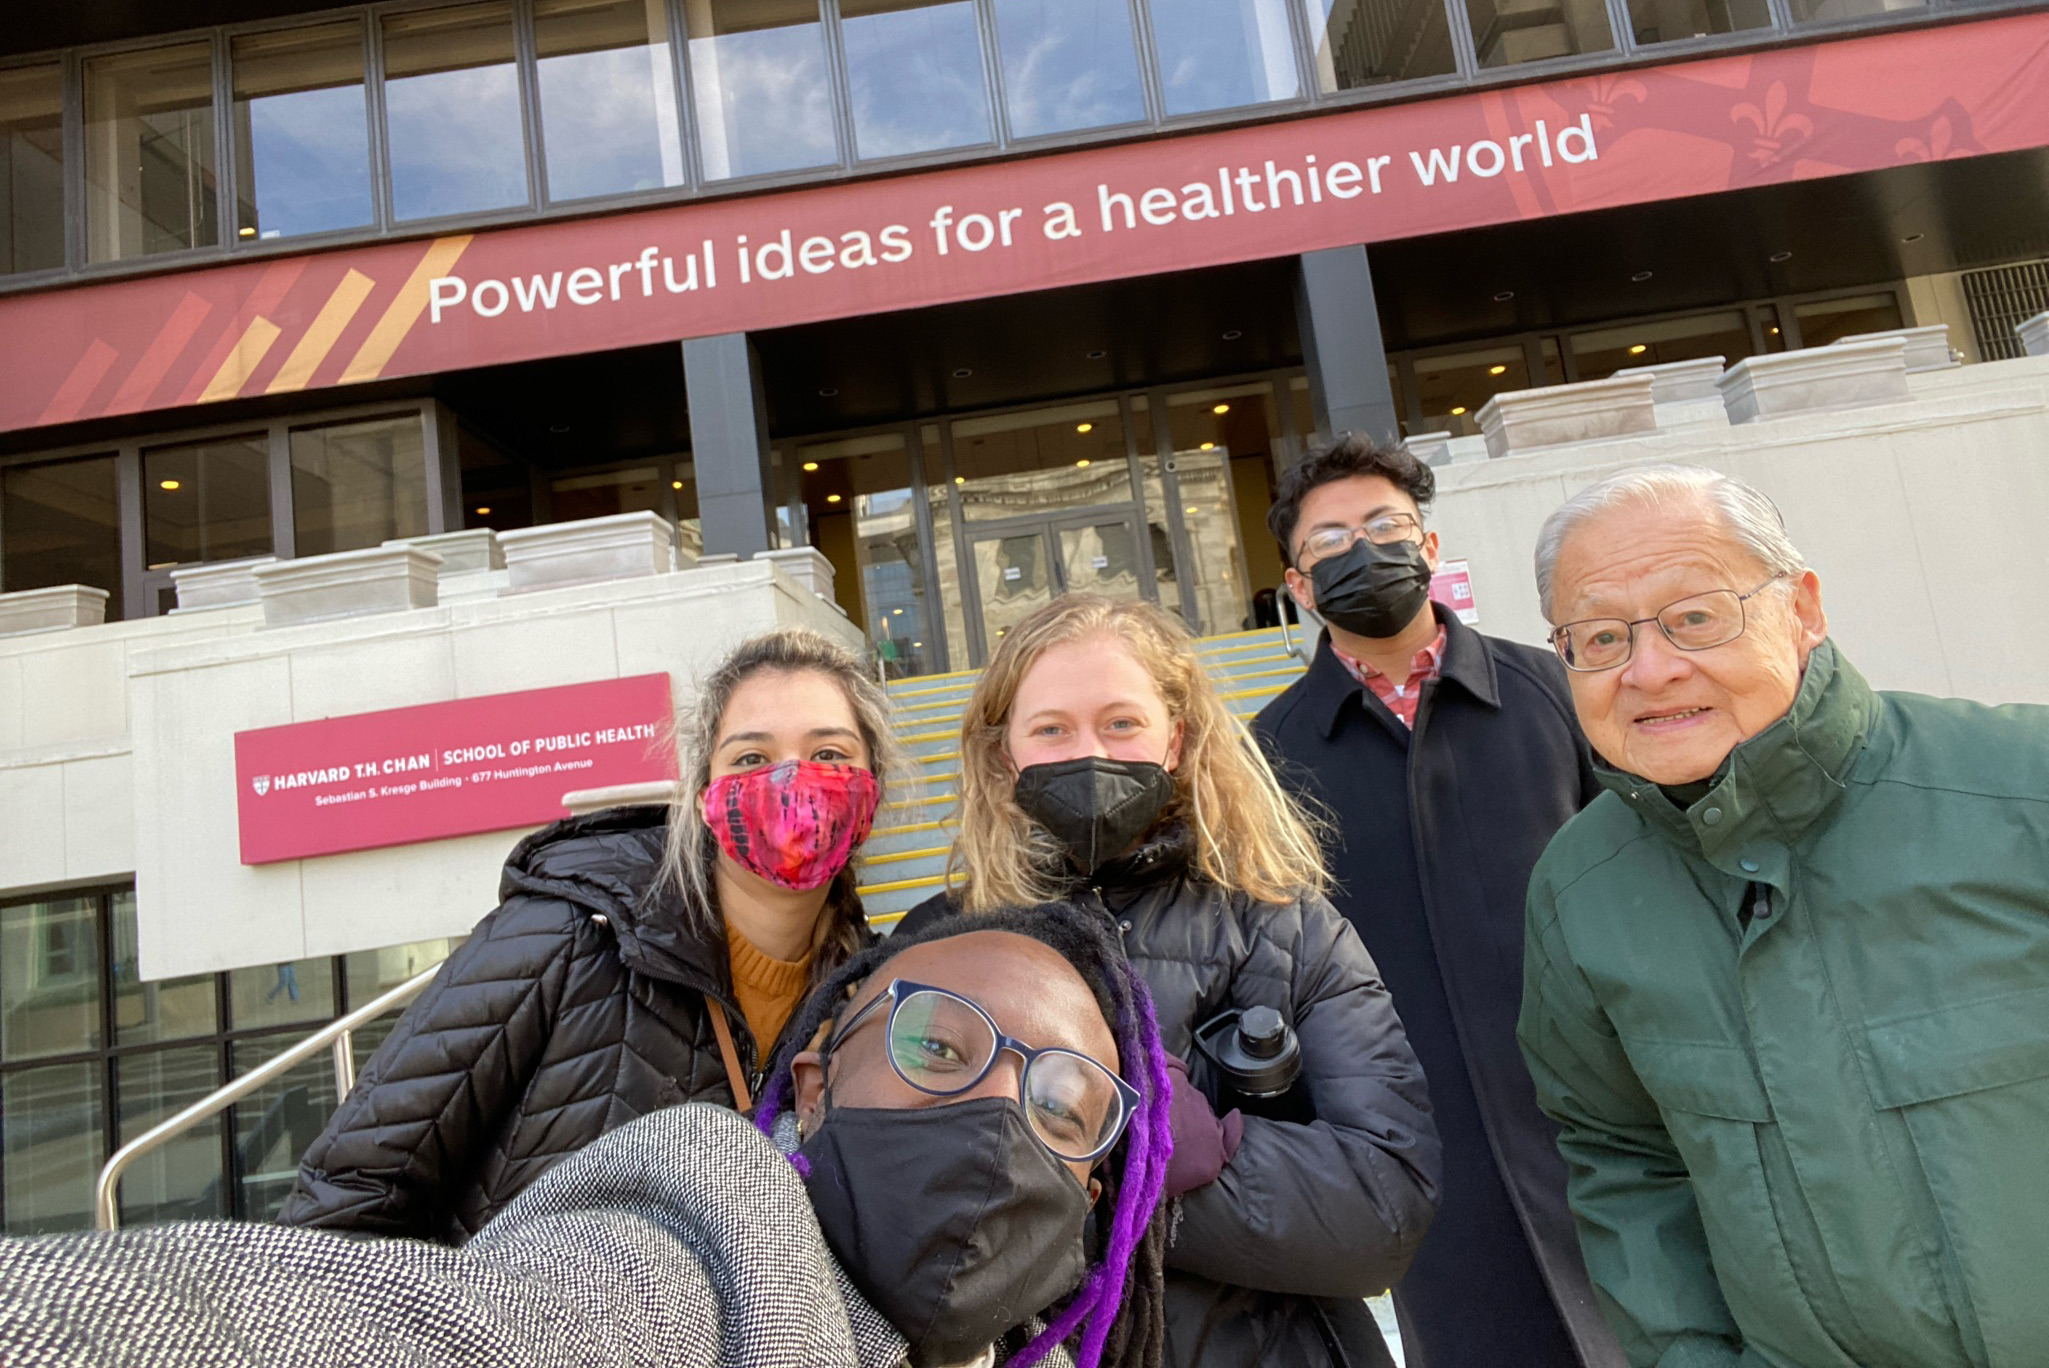 Students pose for a selfie under a Harvard building reading: "Powerful ideas for a healthier world."